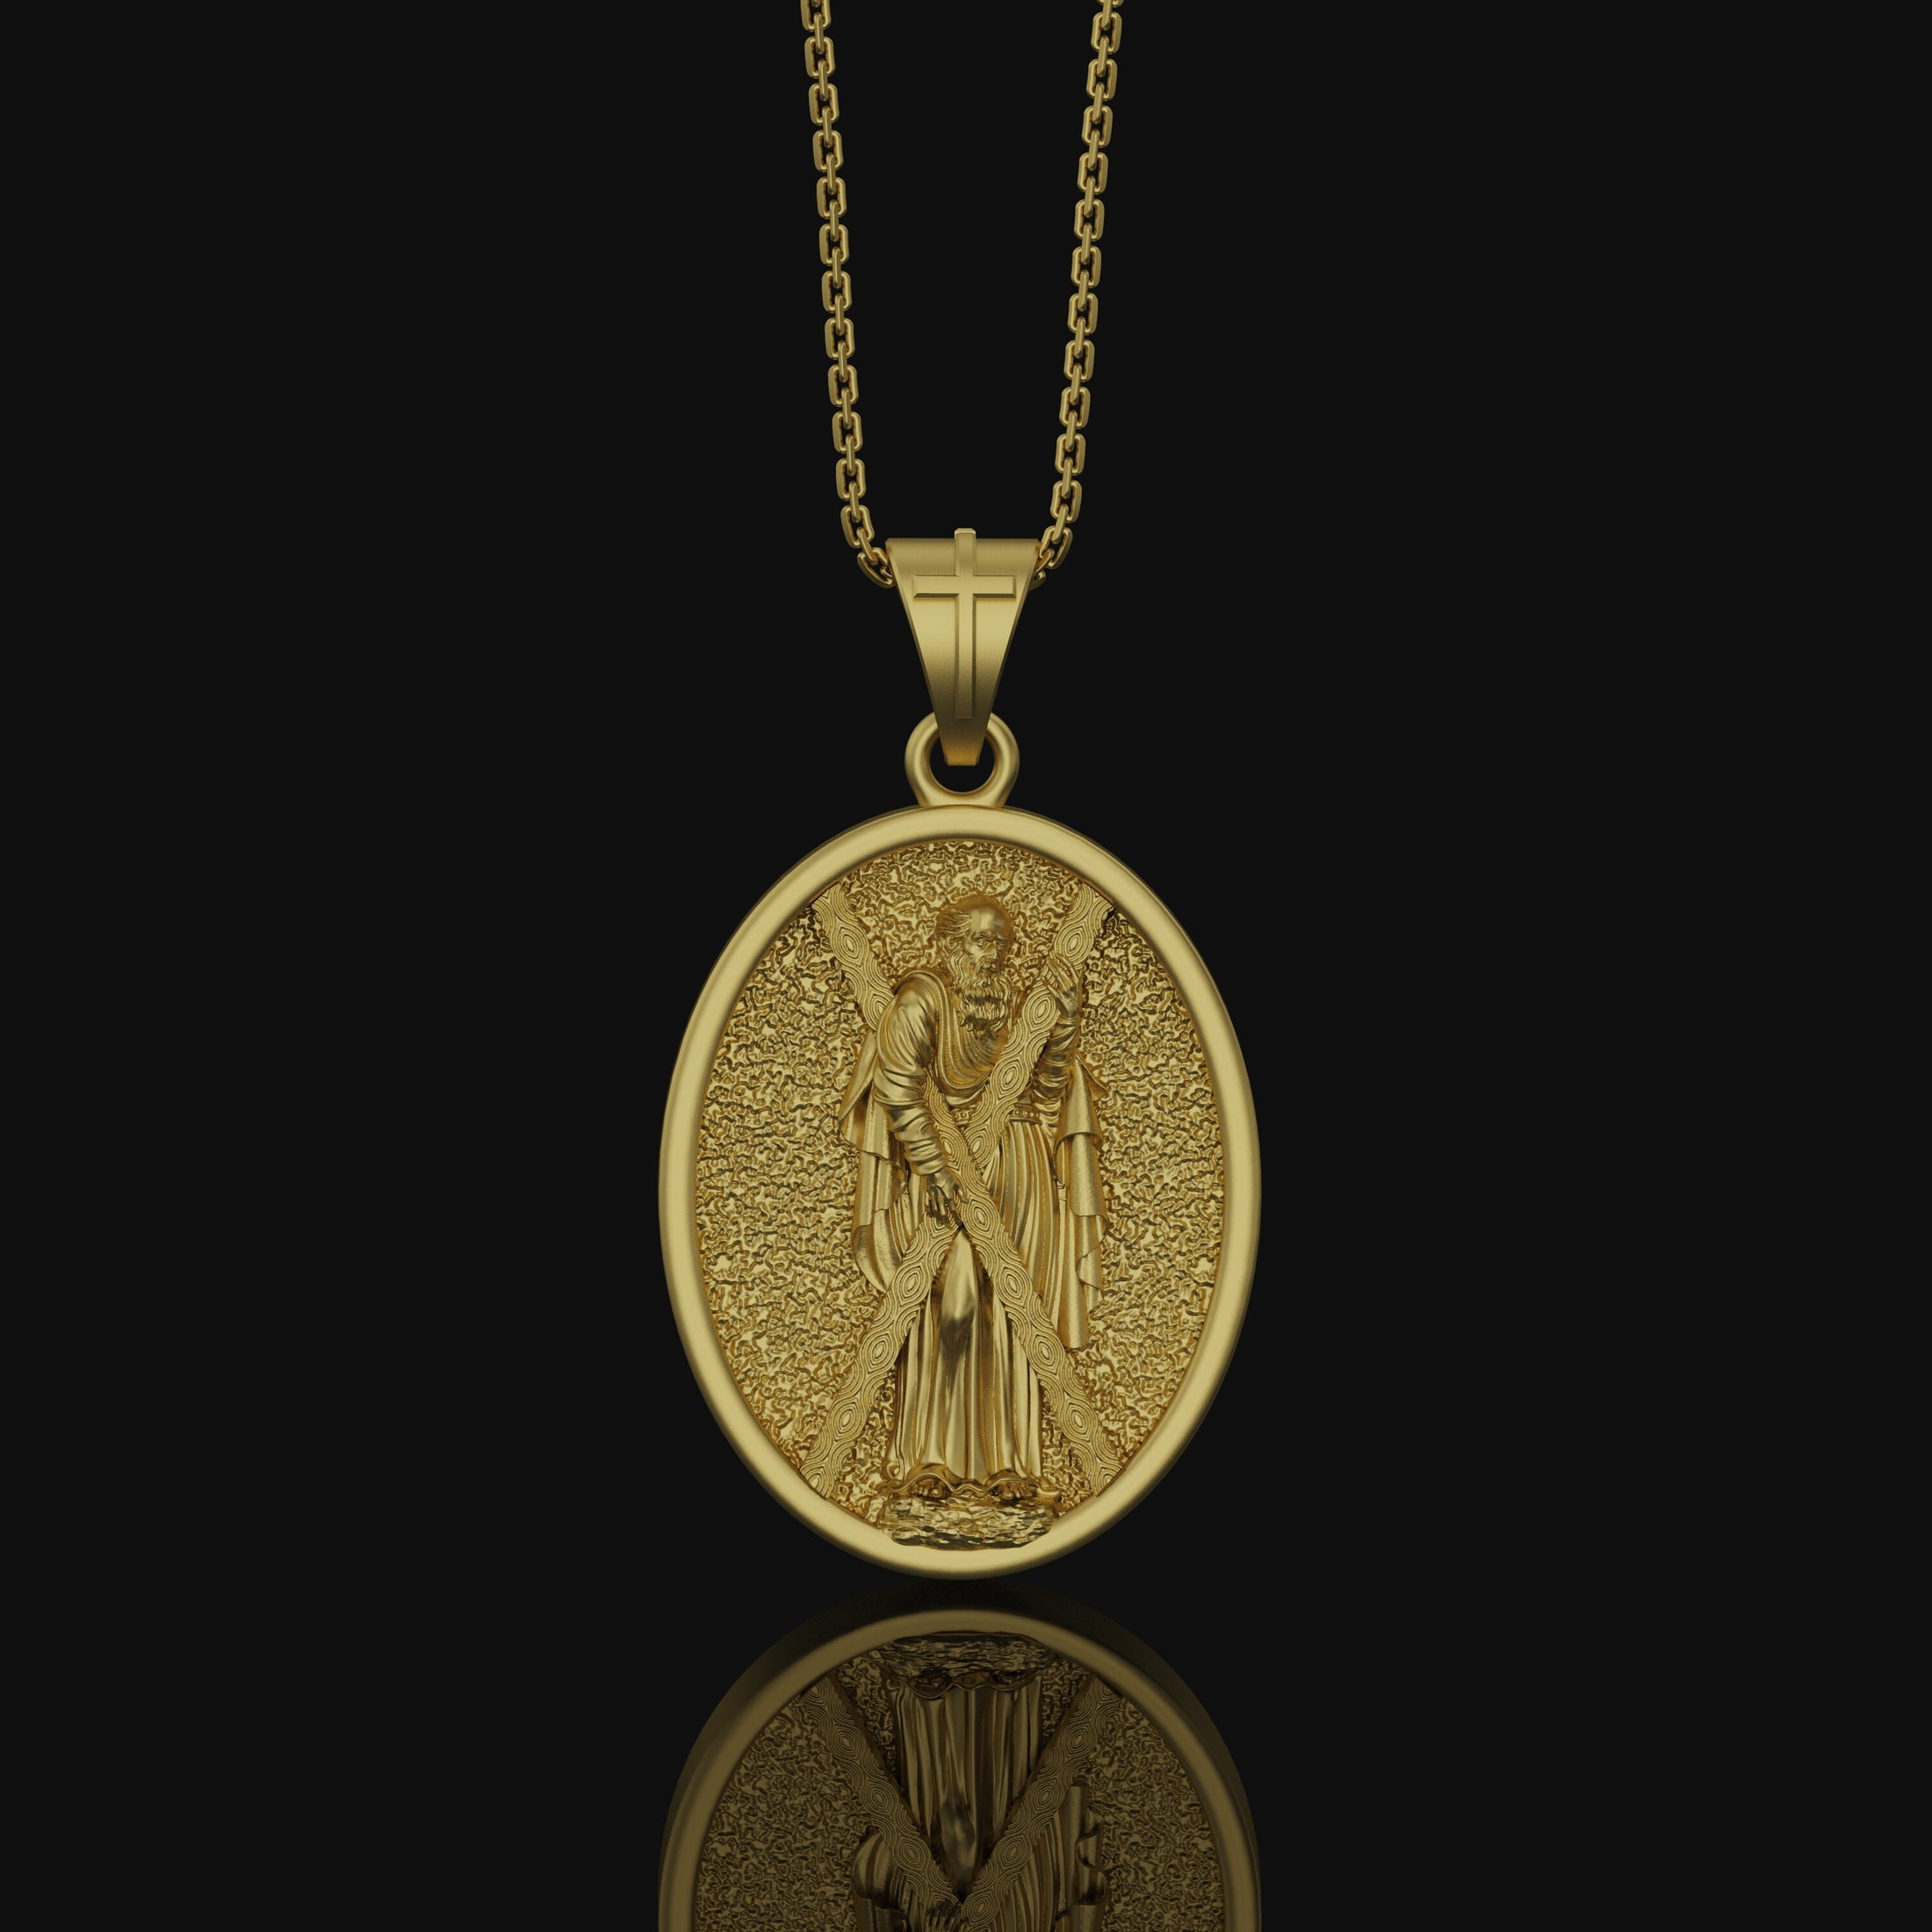 St Andrew Medal, Patron Saint Medal, Andrew The Apostle, Religious Medals Jewelry, Catholic Necklace, Confirmation Gift Gold Finish